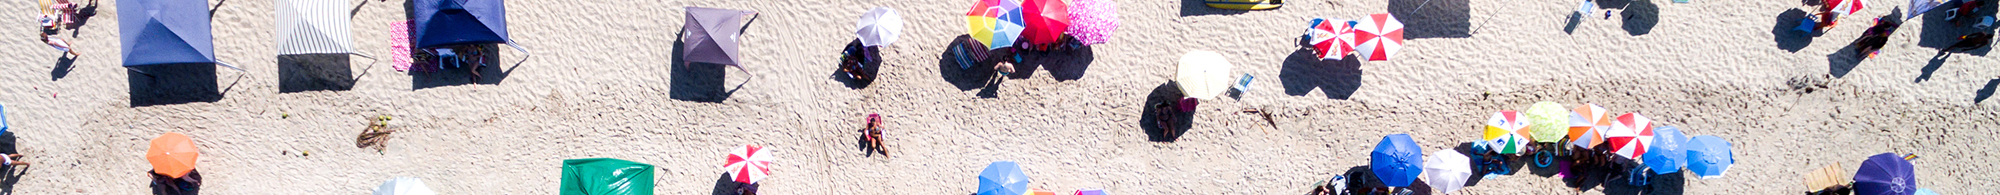 aerial shot of a beach with people playing in the surf and colorful umbrellas on the sand